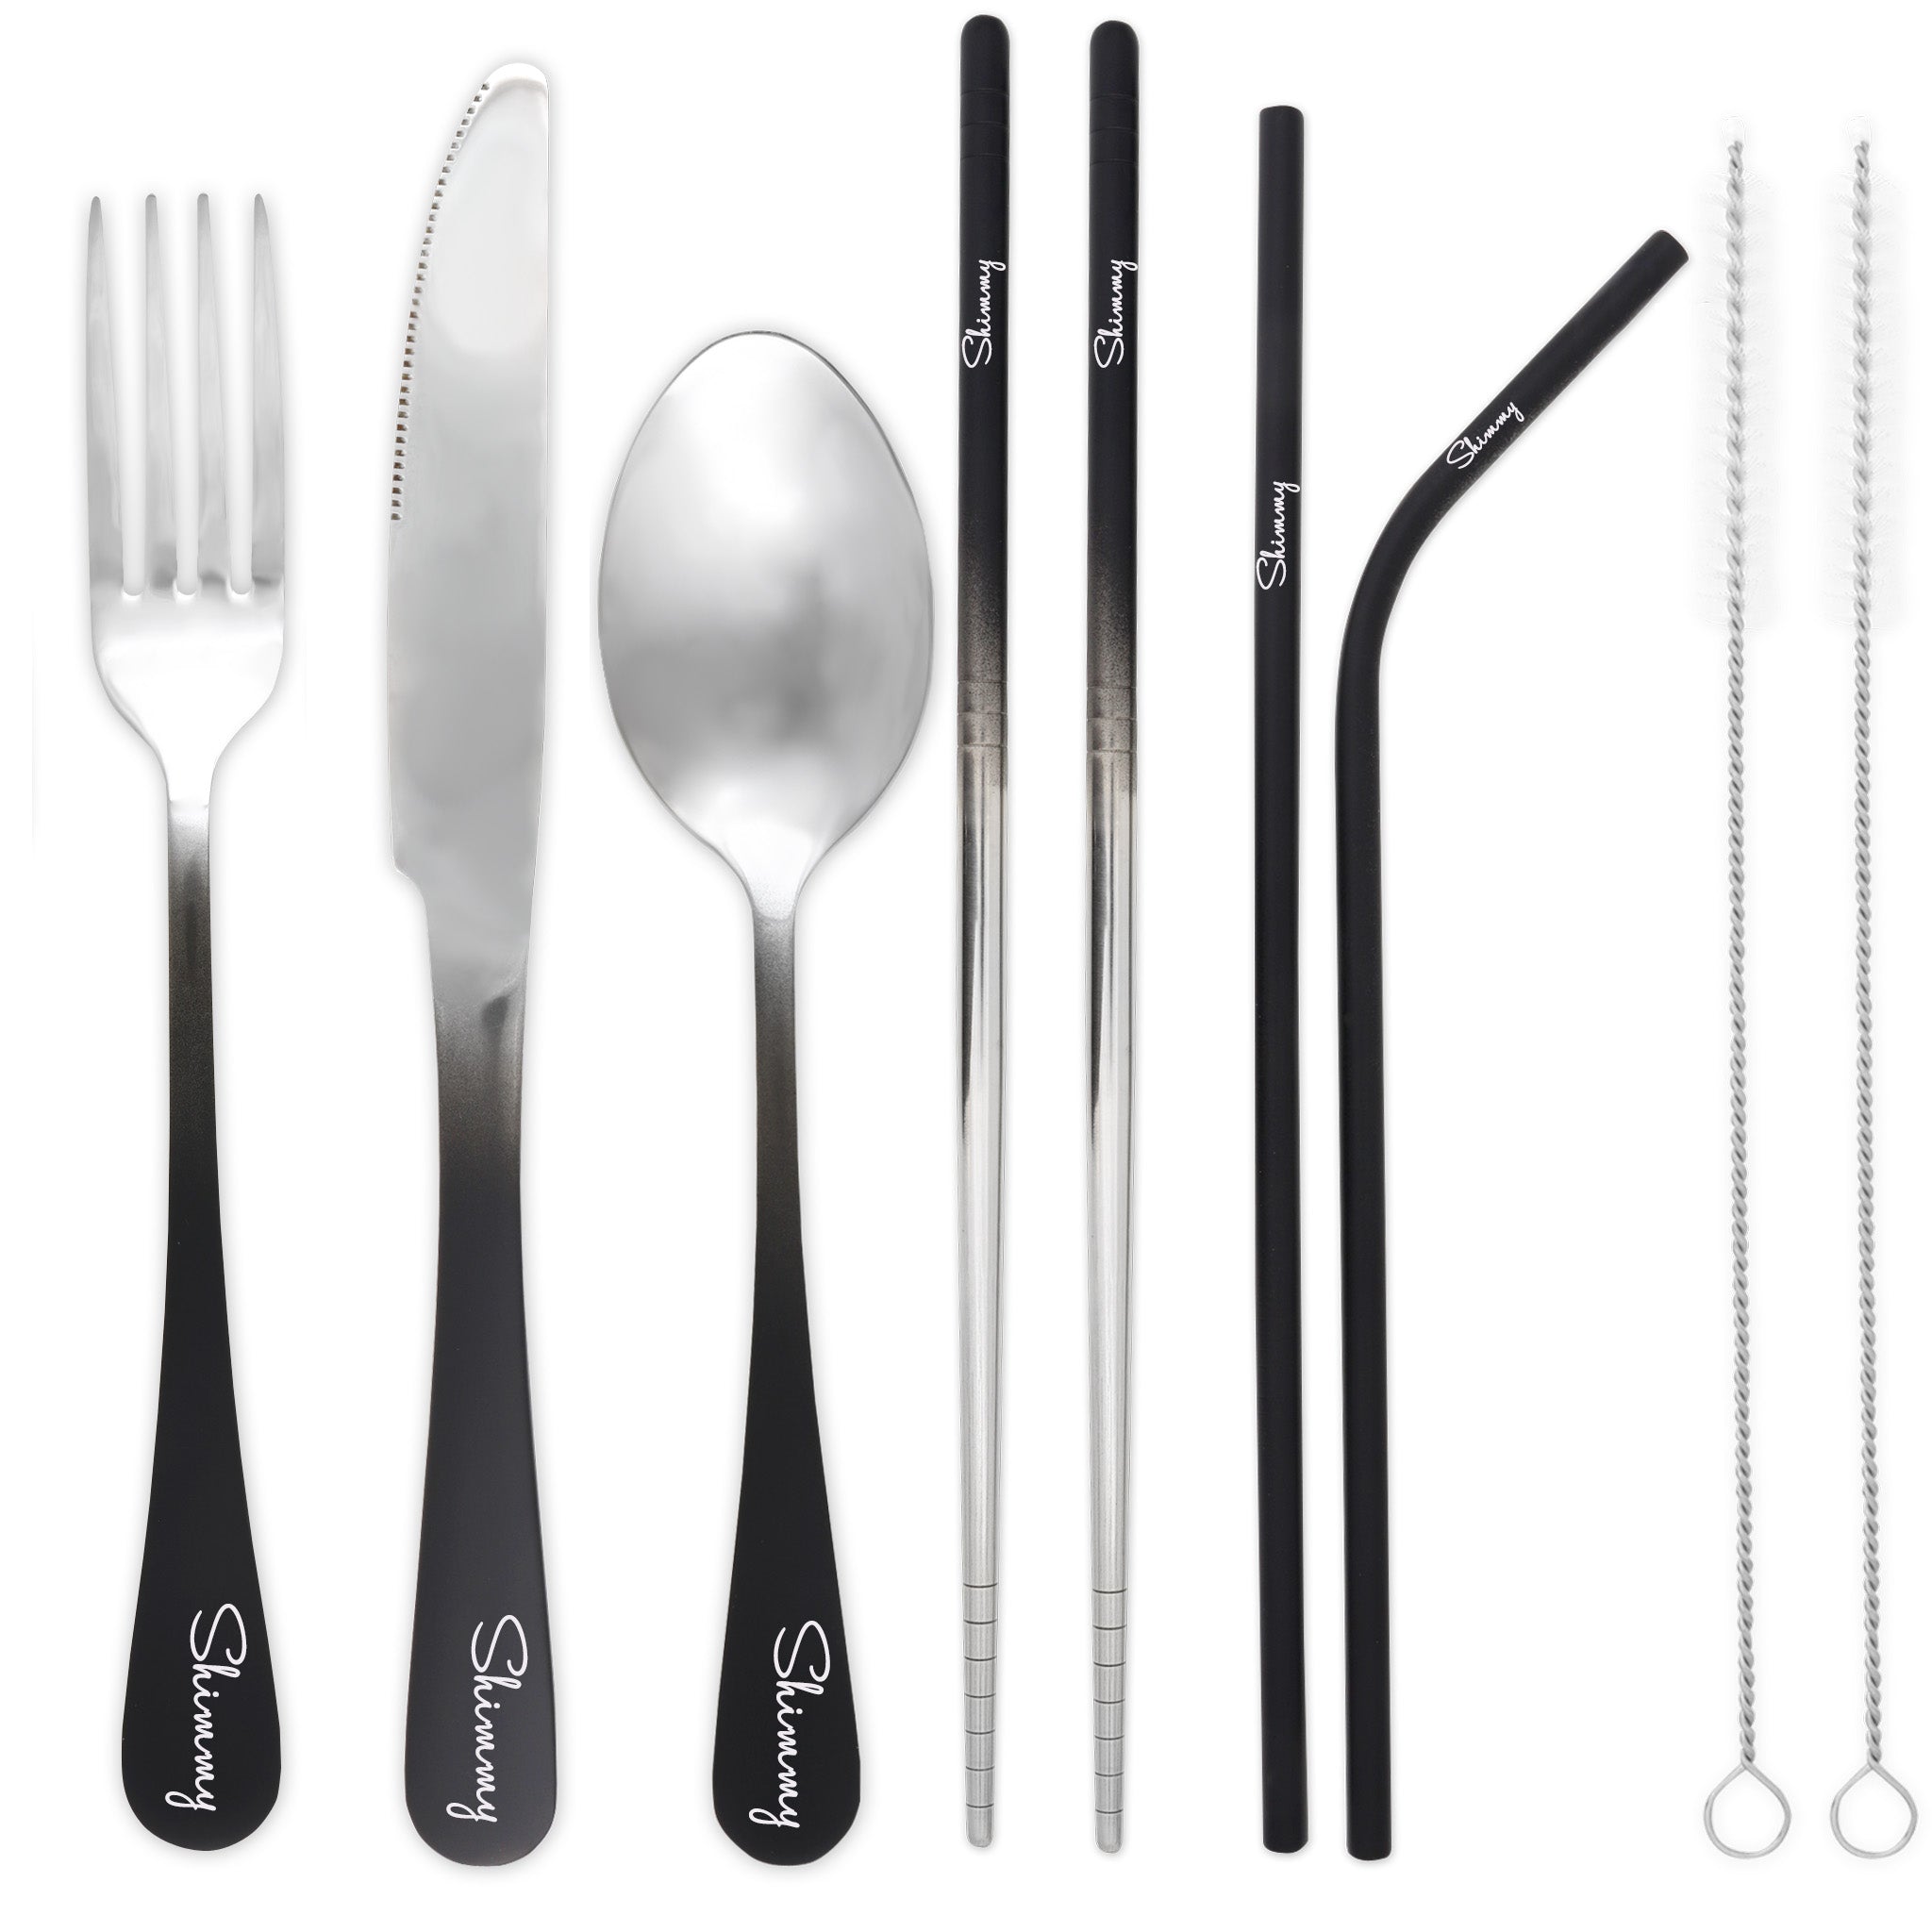 This 5-piece travel cutlery set has to be one of the most stylish